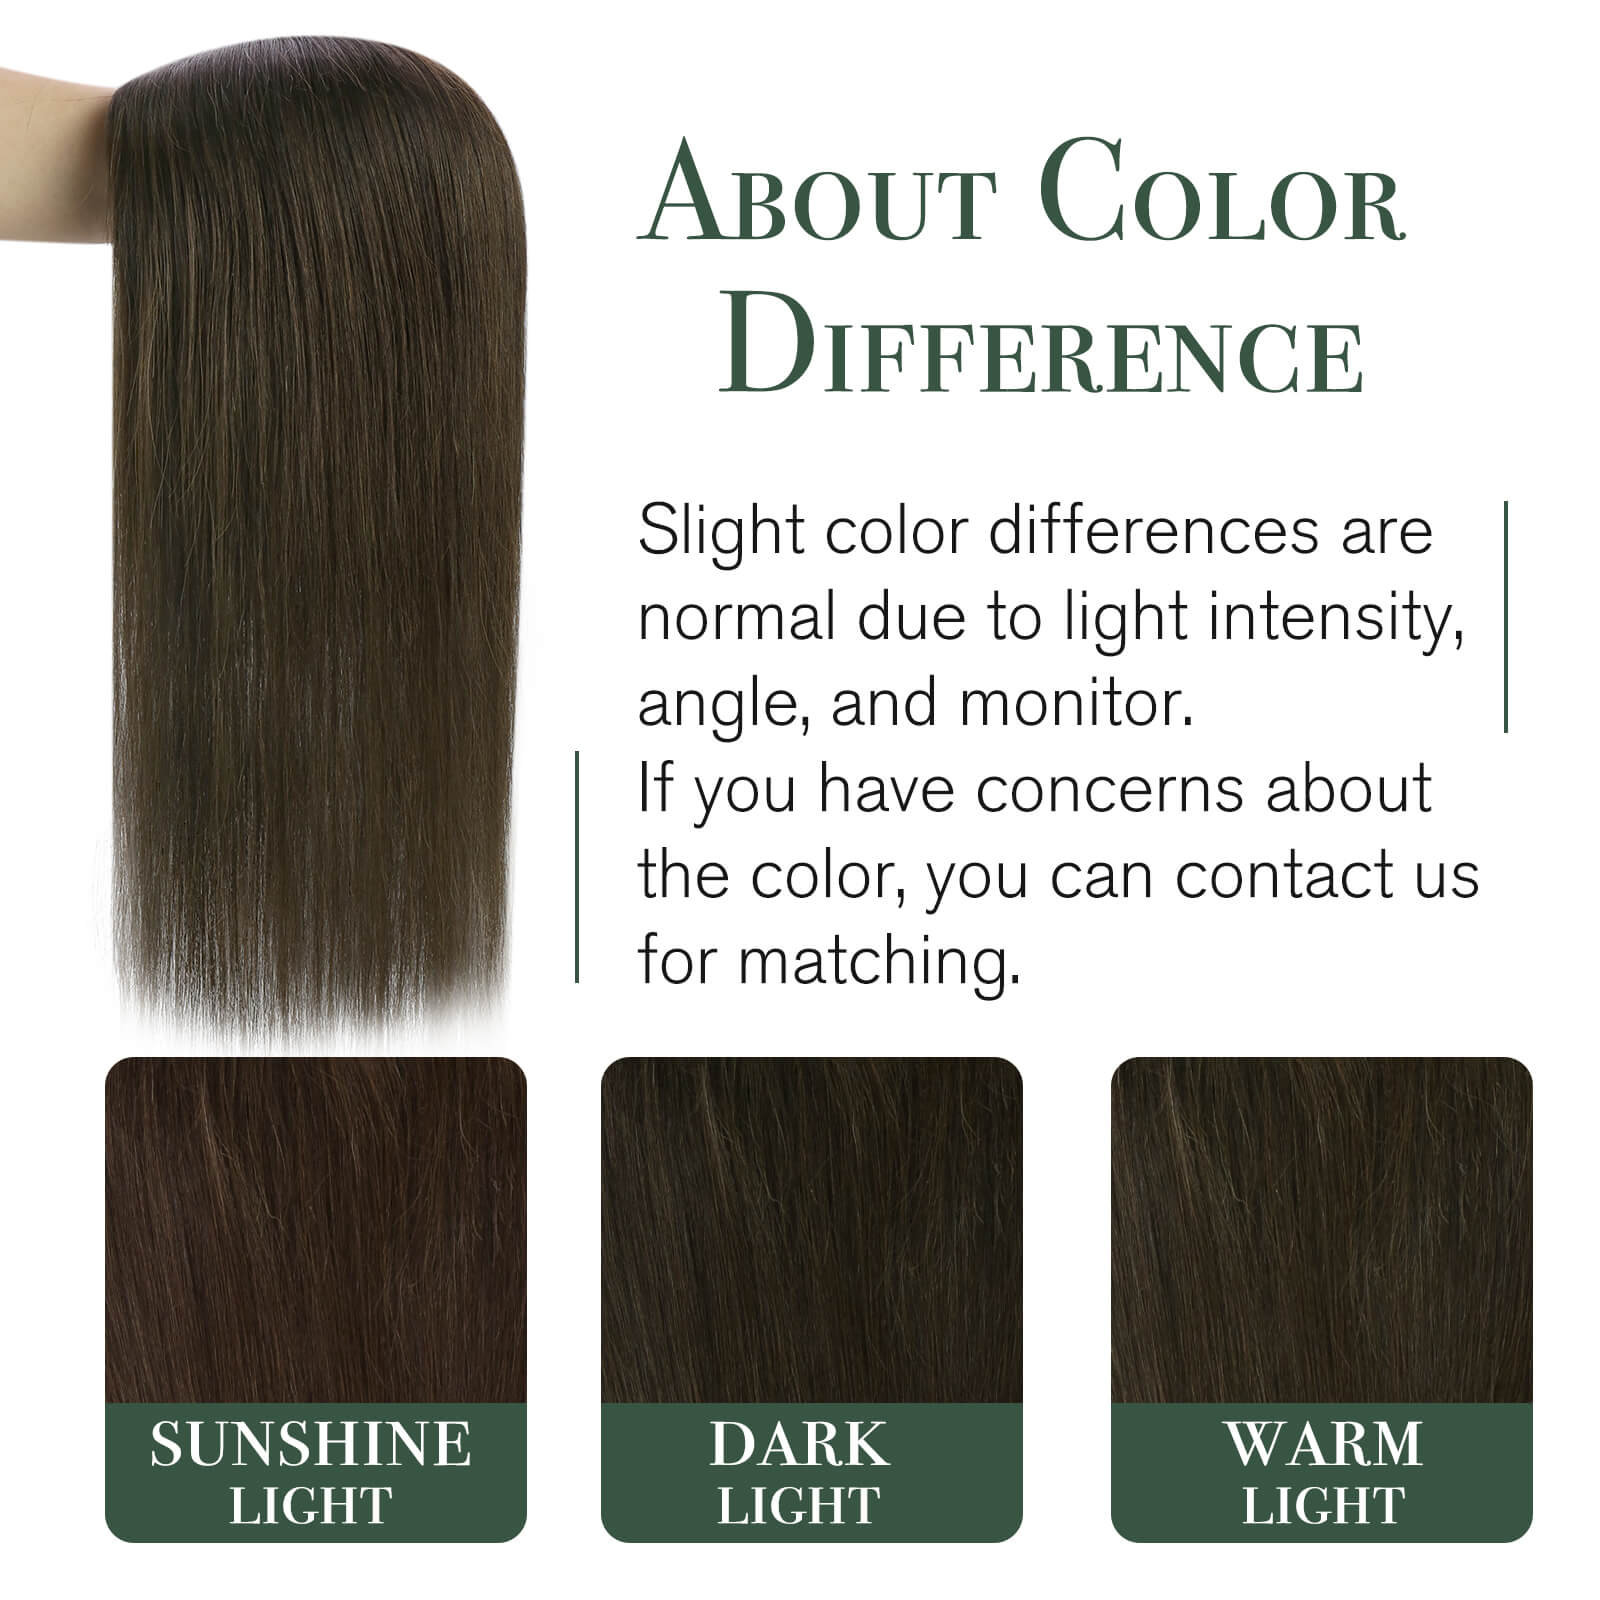 about color difference